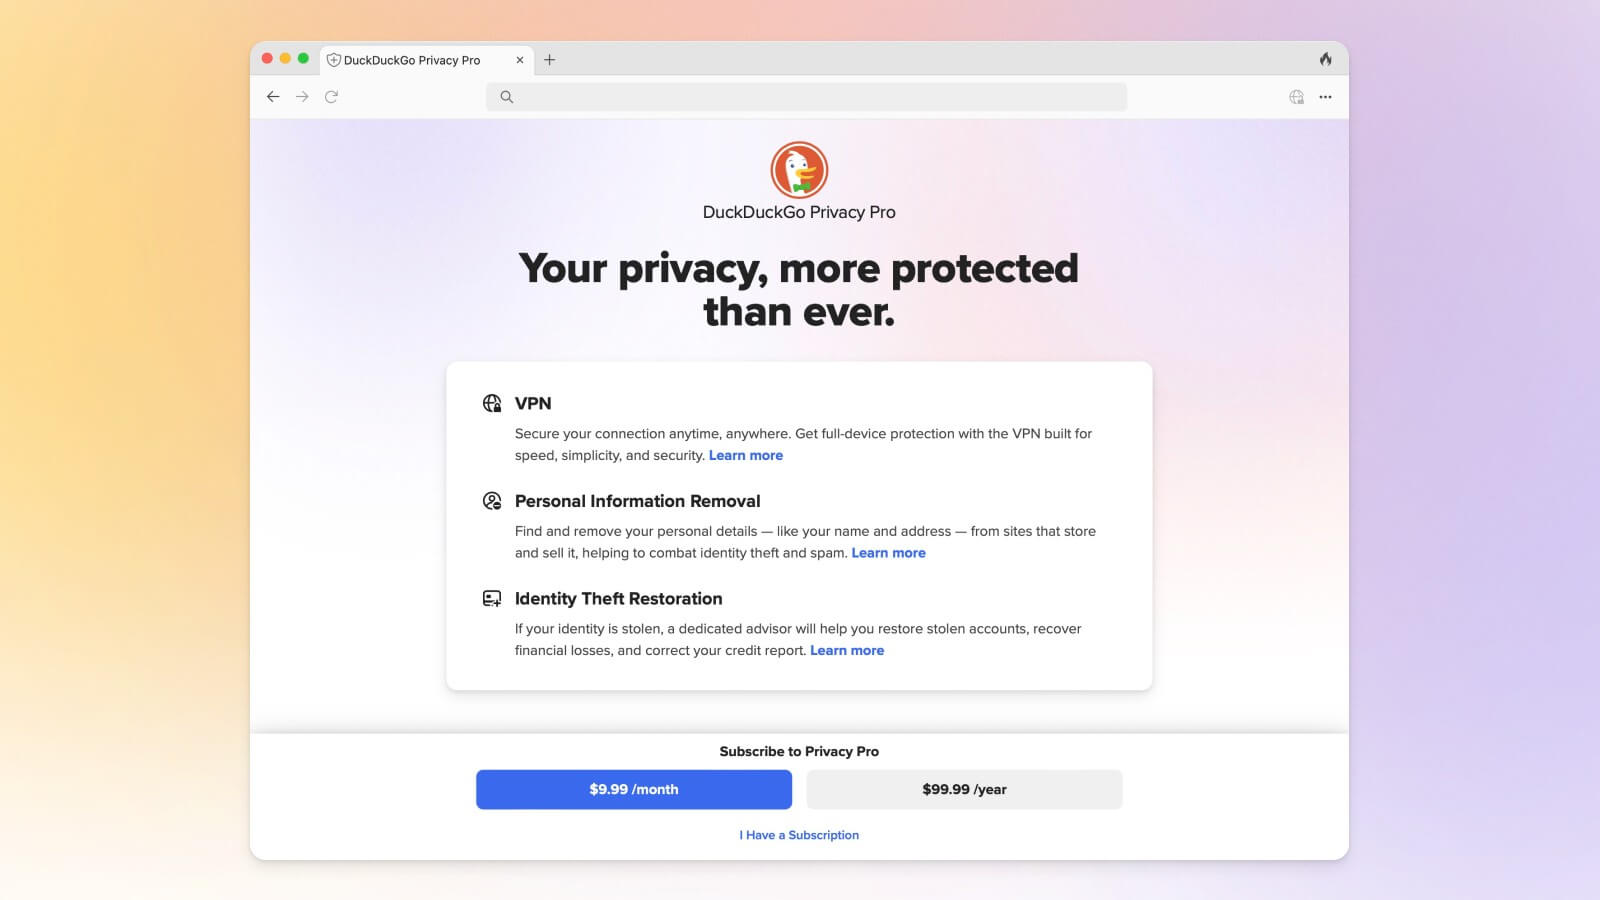 Launch of Privacy Pro